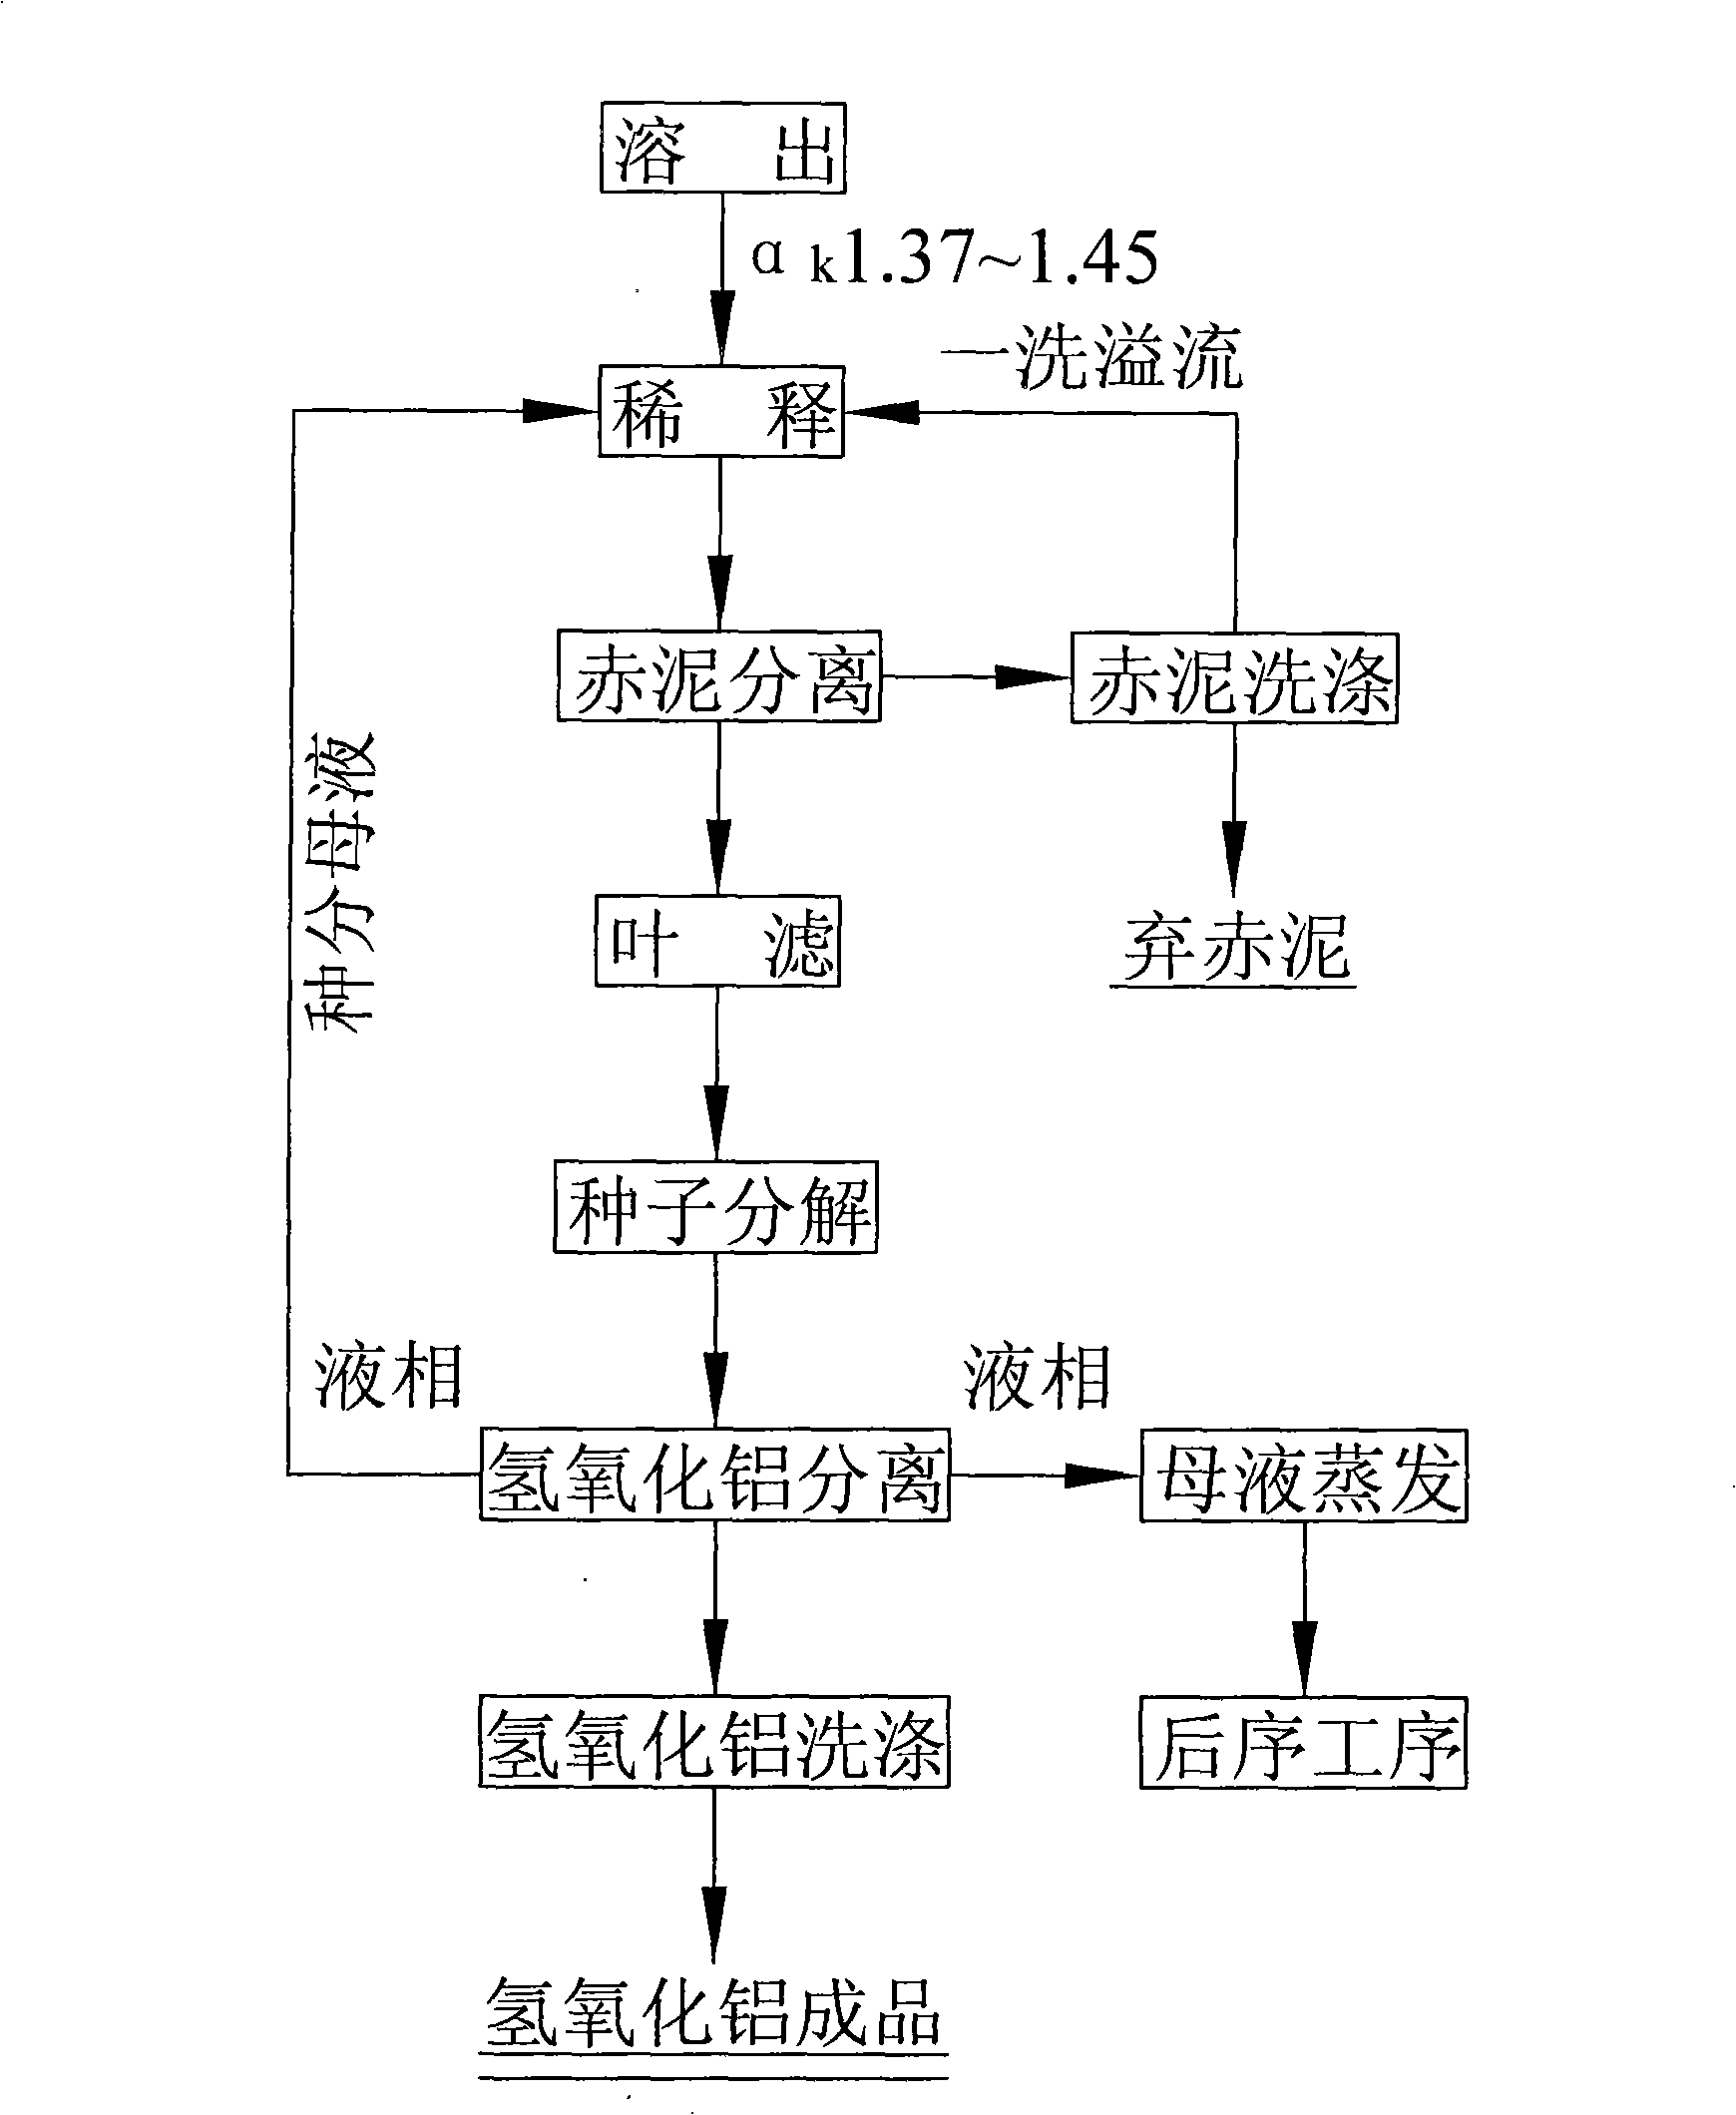 Method for producing aluminum hydroxide or aluminum oxide by Bayer process